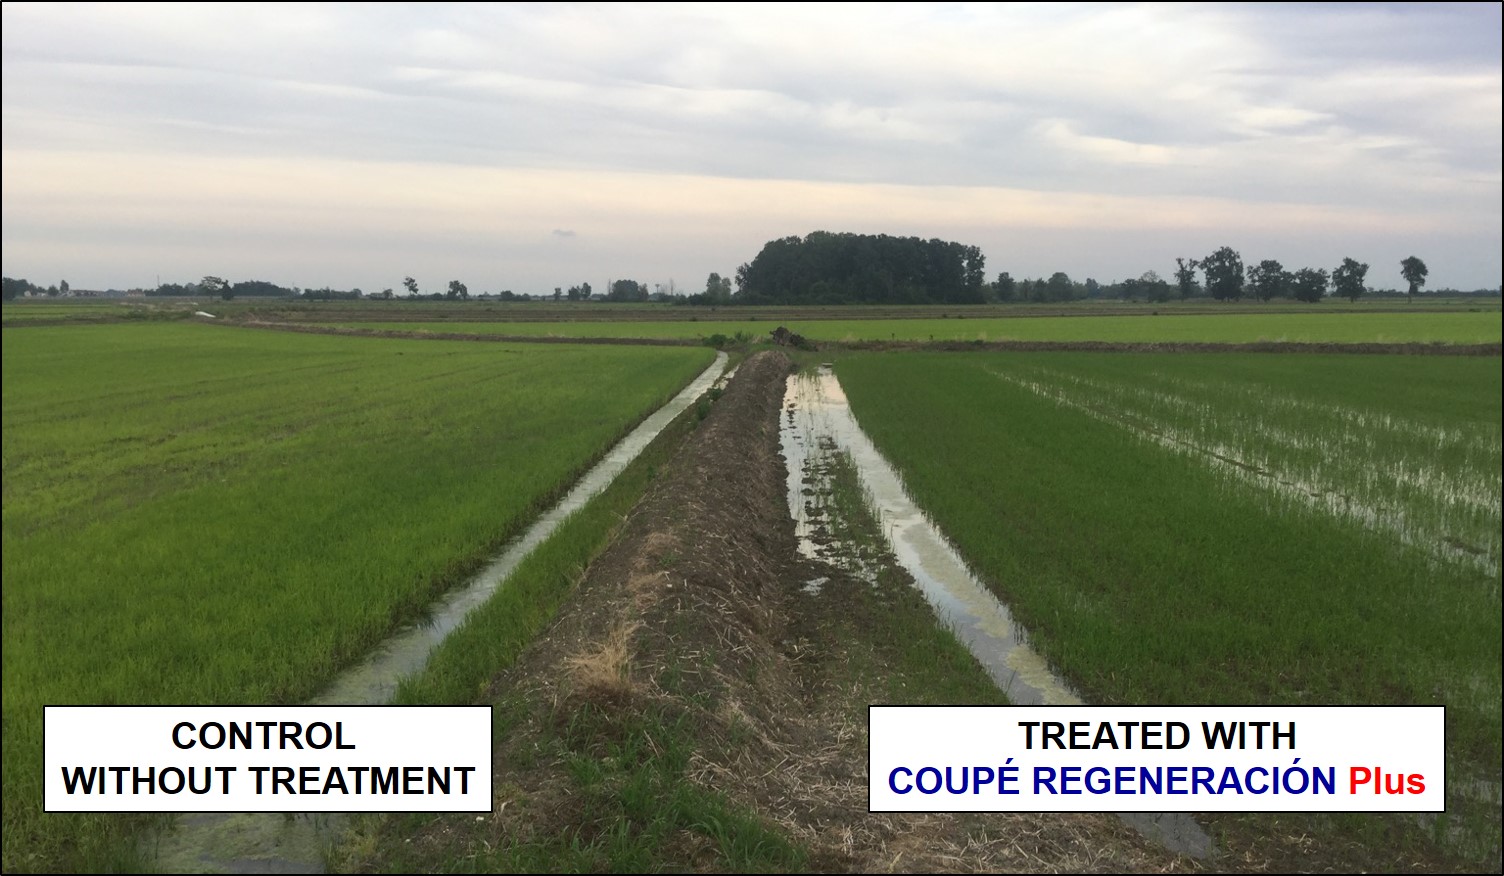 Comparation of rice plants treated with COUPE REGENERACION Plus and control